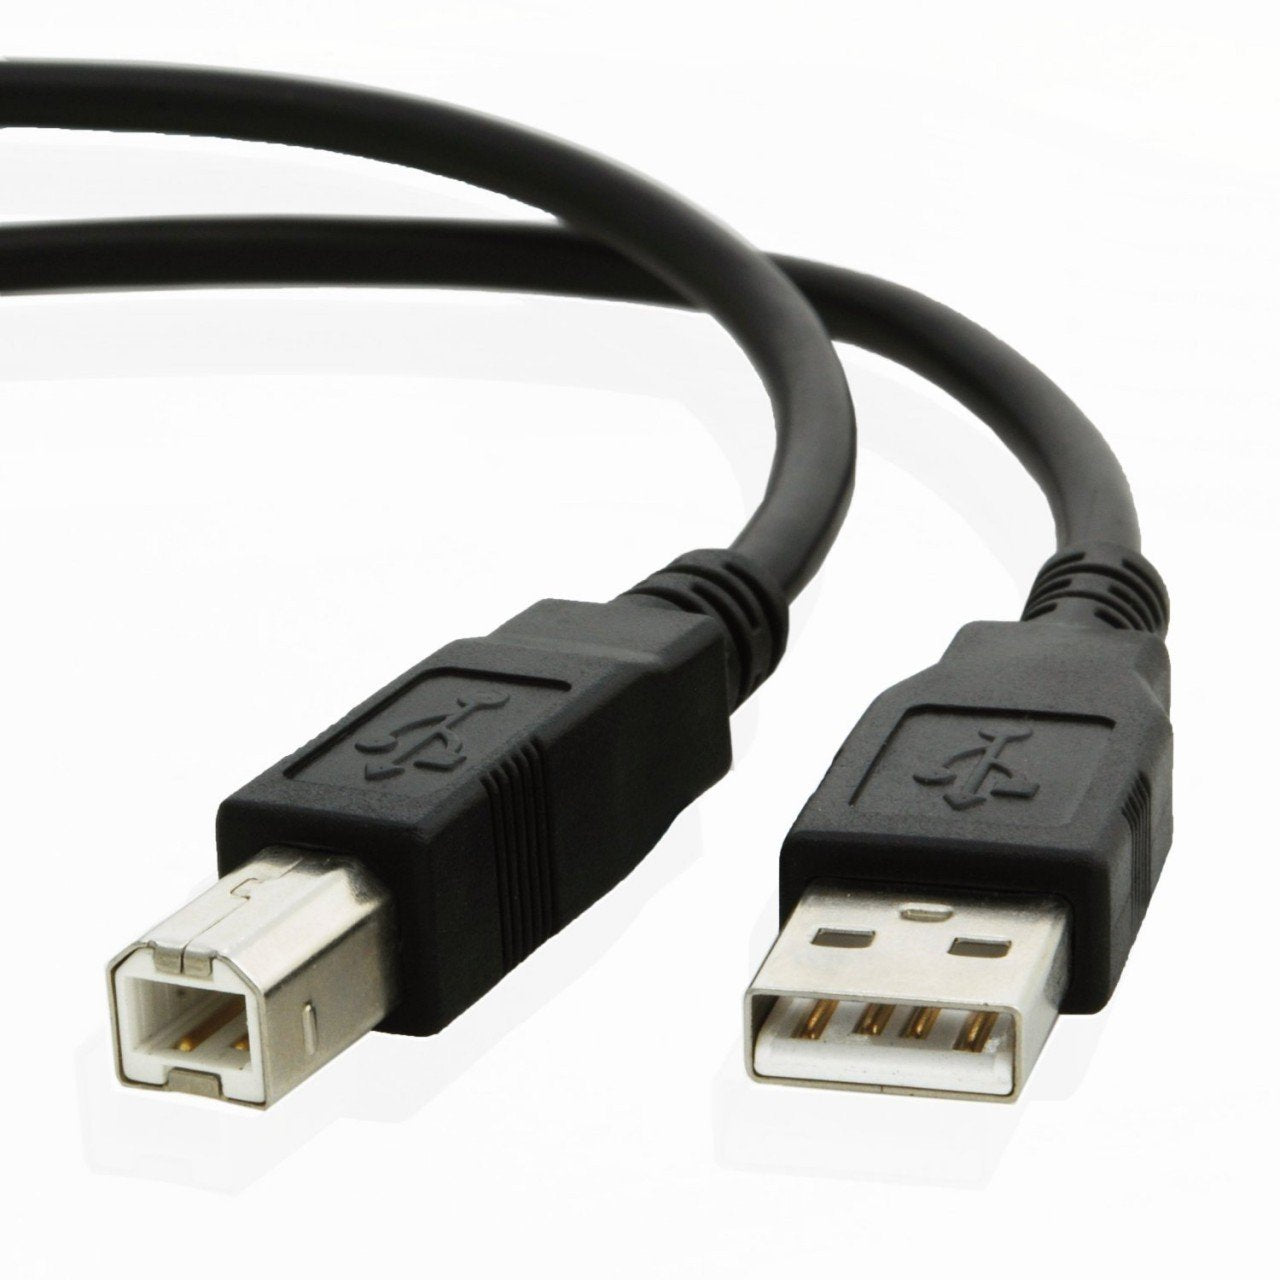 USB cable for Epson EX9200